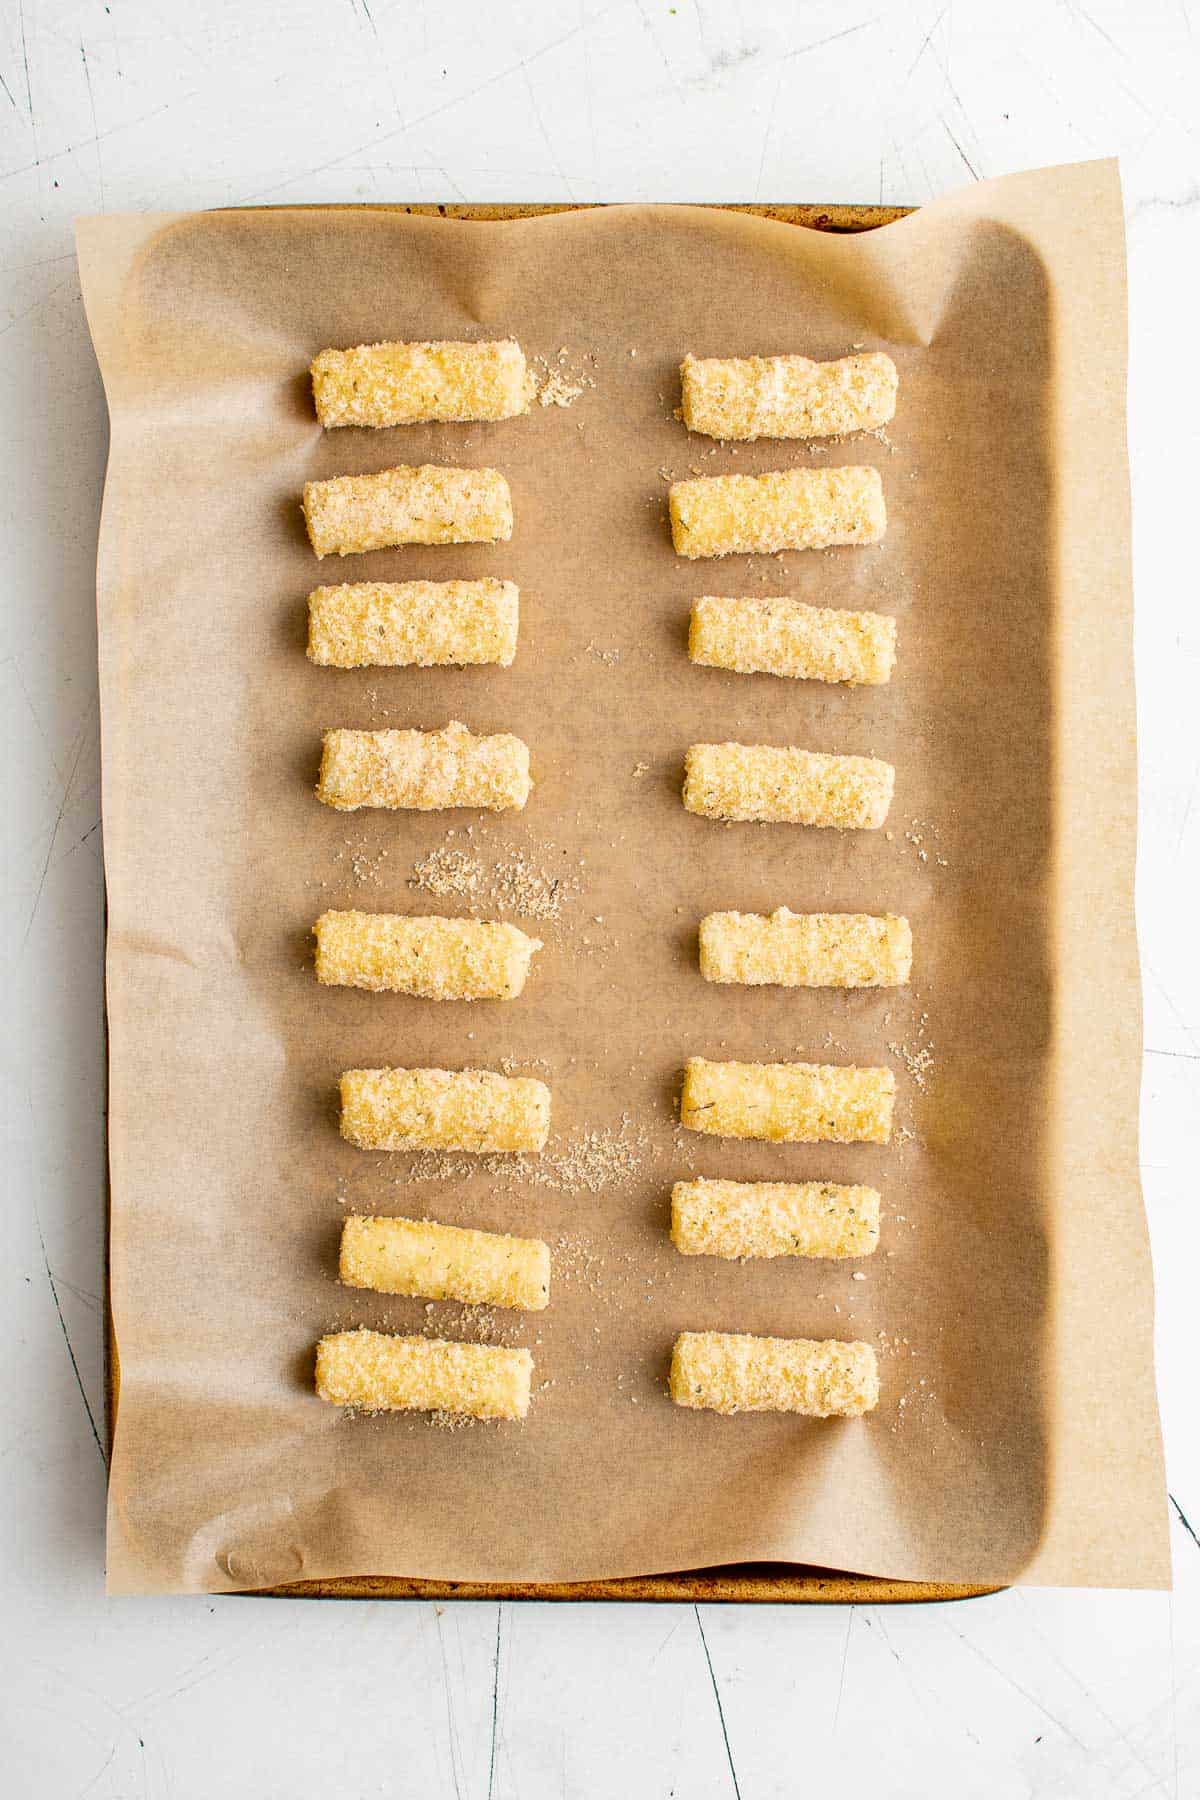 a parchment lined baking sheet, topped with rows of breaded mozzarella sticks waiting to be fried